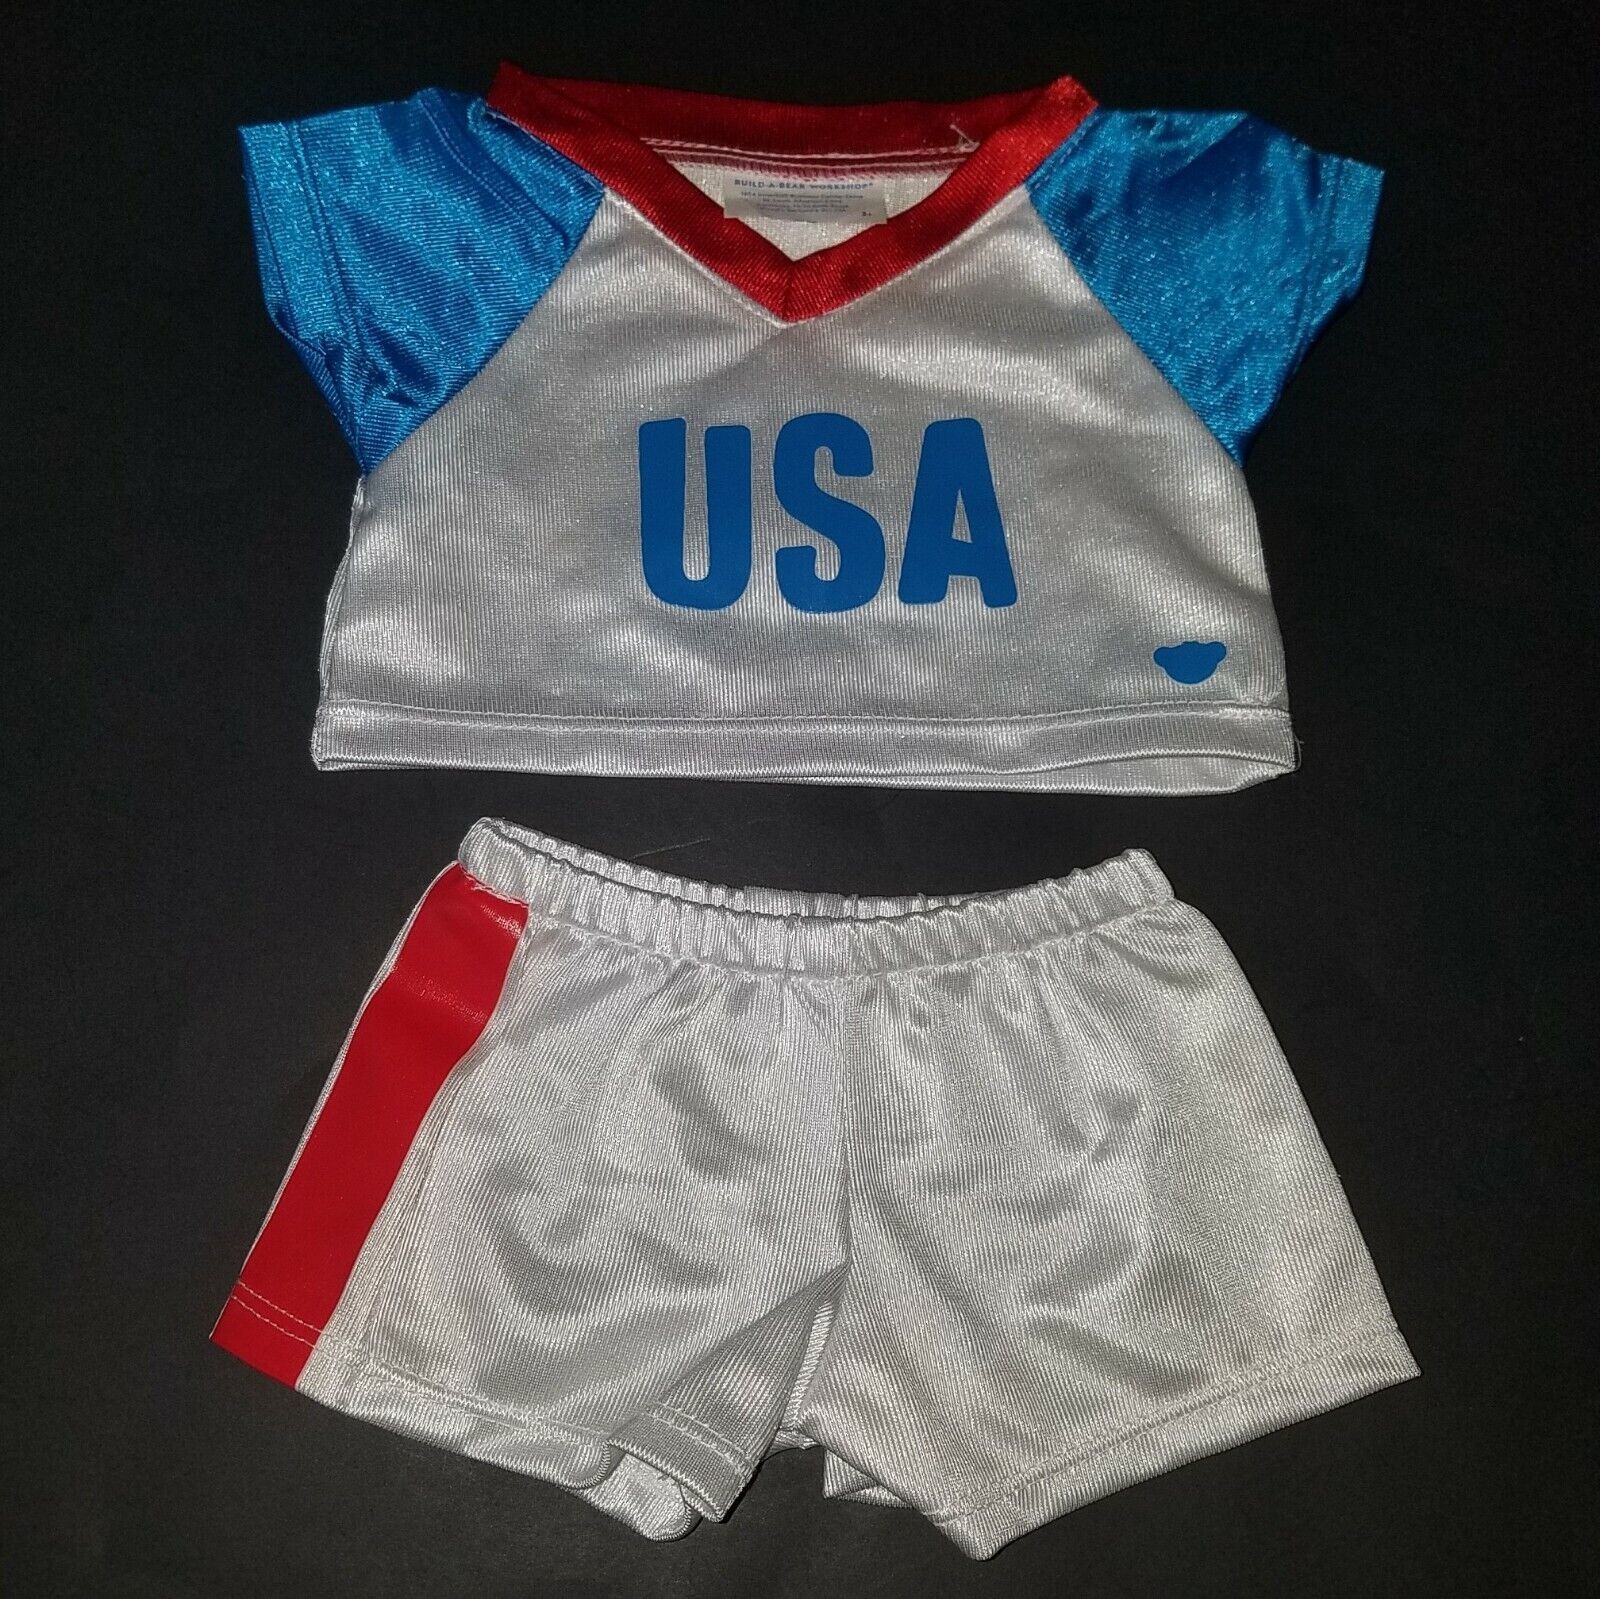 Primary image for USA Uniform Jersey Shorts Red White Blue Build A Bear Plush Clothing Outfit BABW